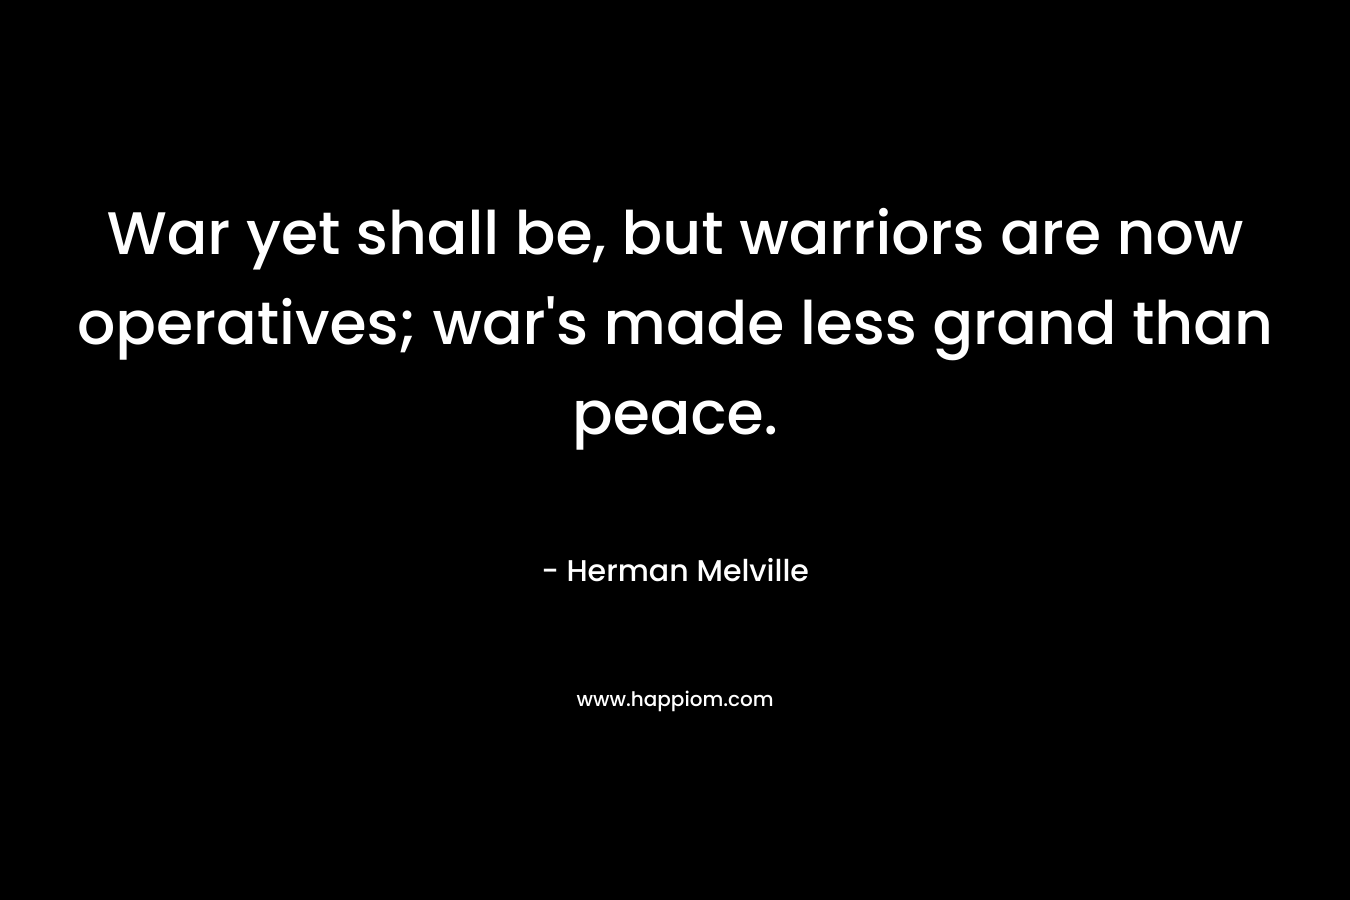 War yet shall be, but warriors are now operatives; war’s made less grand than peace. – Herman Melville